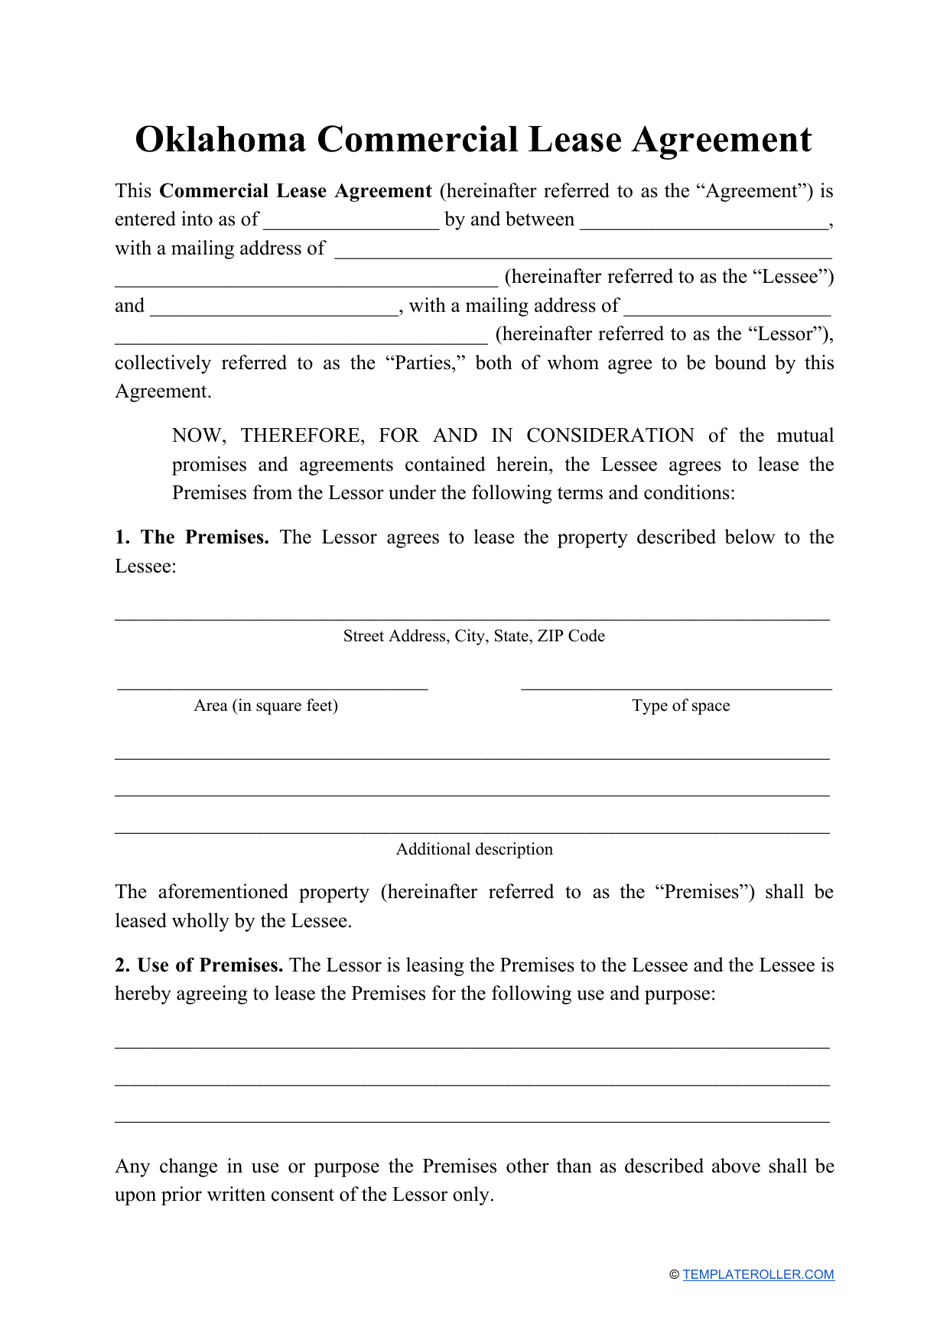 Commercial Lease Agreement Template - Oklahoma, Page 1